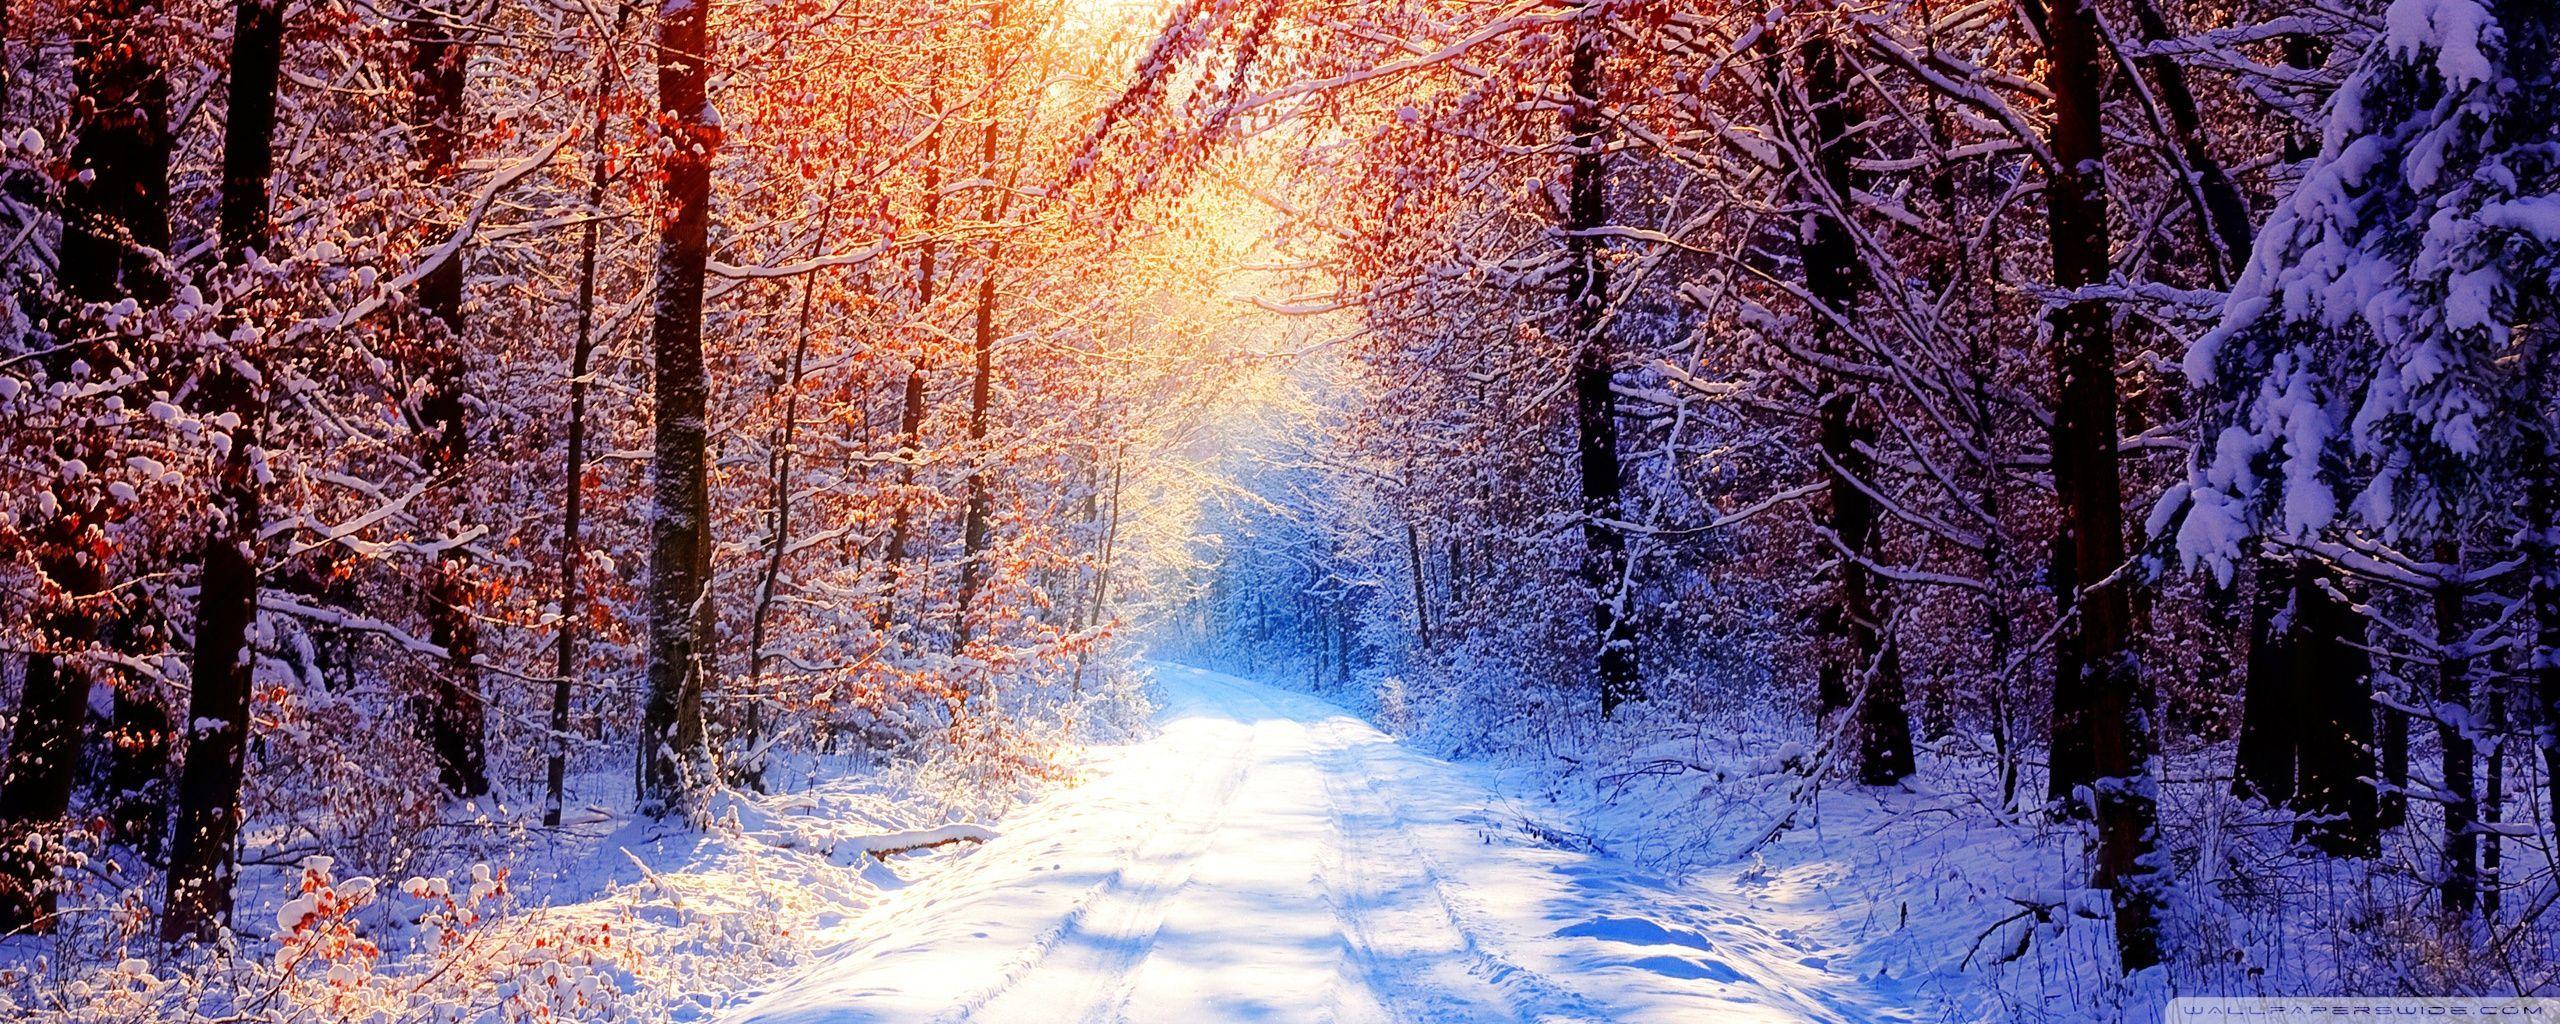 Snow Dual Monitor Wallpapers - Top Free Snow Dual Monitor Backgrounds